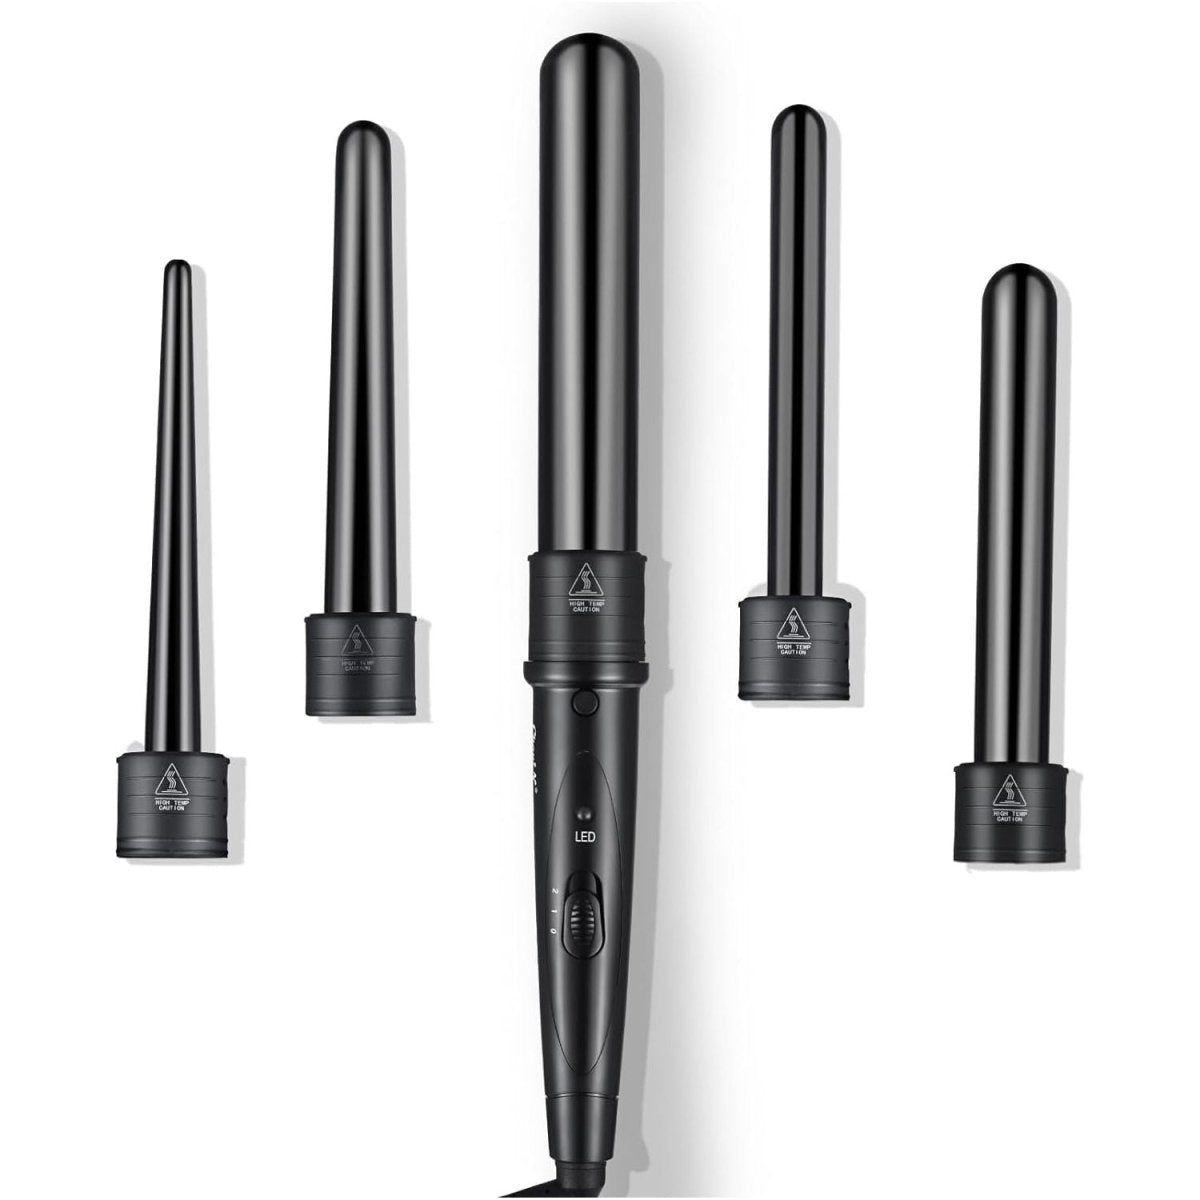 Ceramic Curling Wand, 5 in 1 Hair Curlers Wand with Temperature Control - DG International Ventures Limited